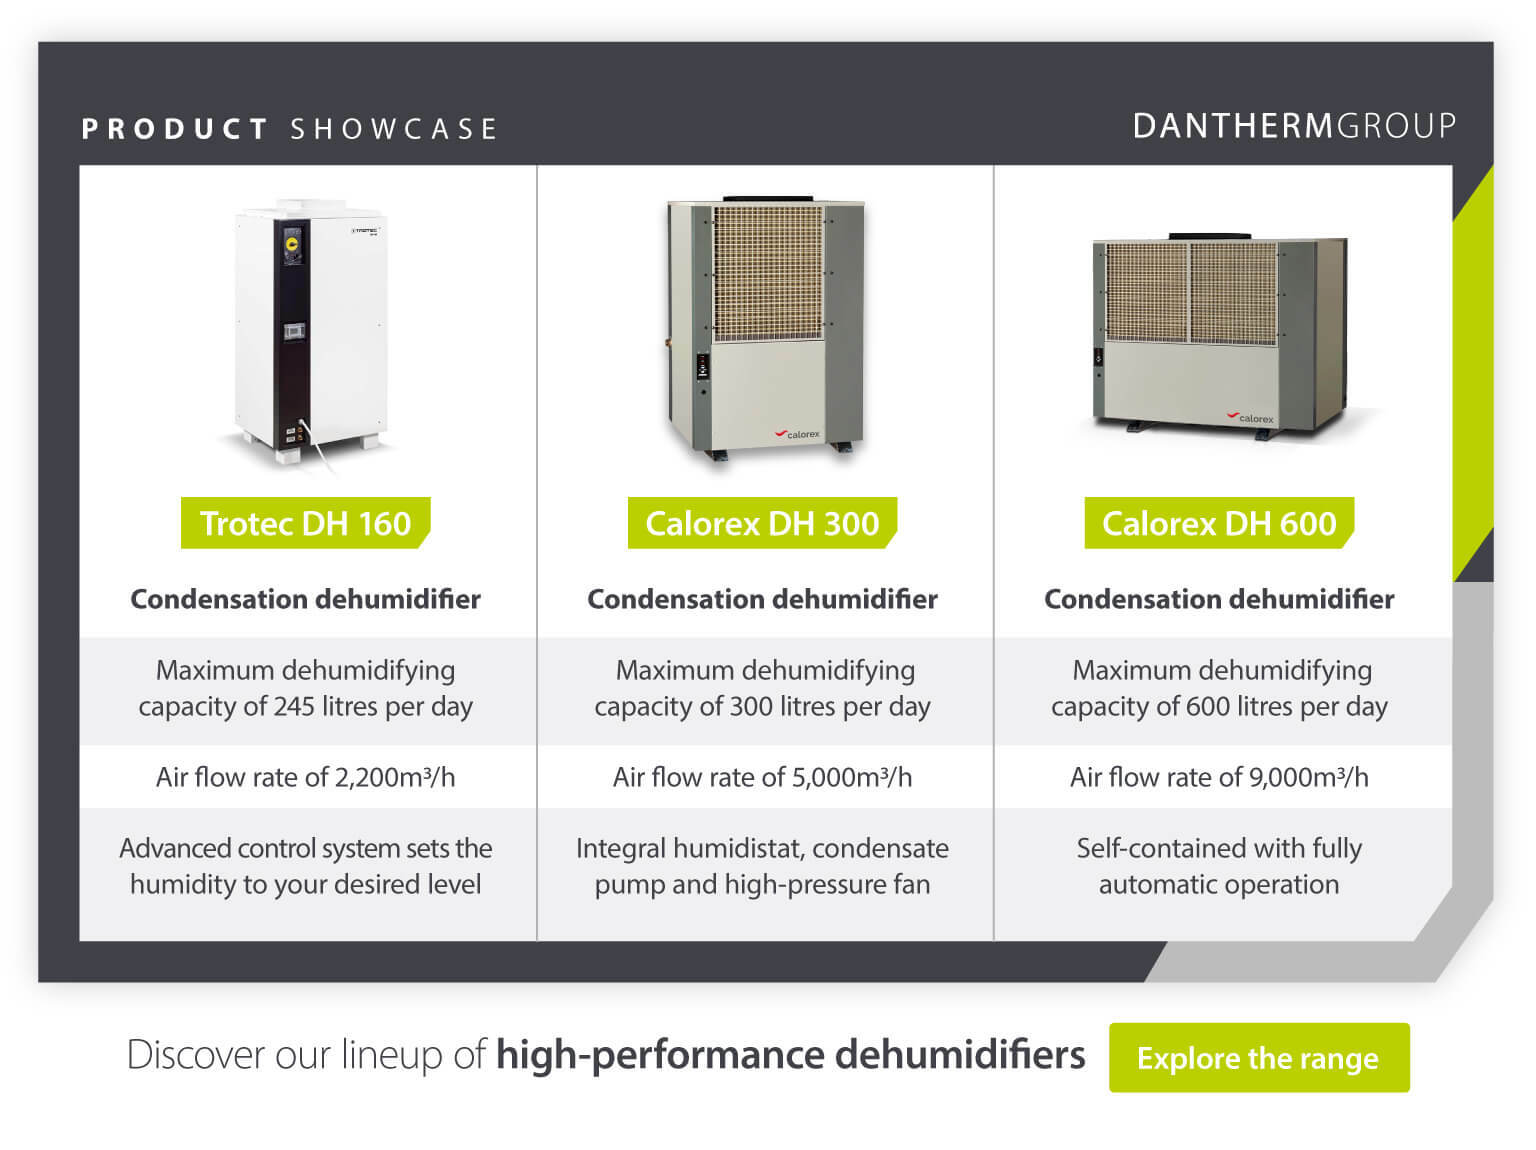 Product showcase comparing condensation dehumidifiers for automotive rust